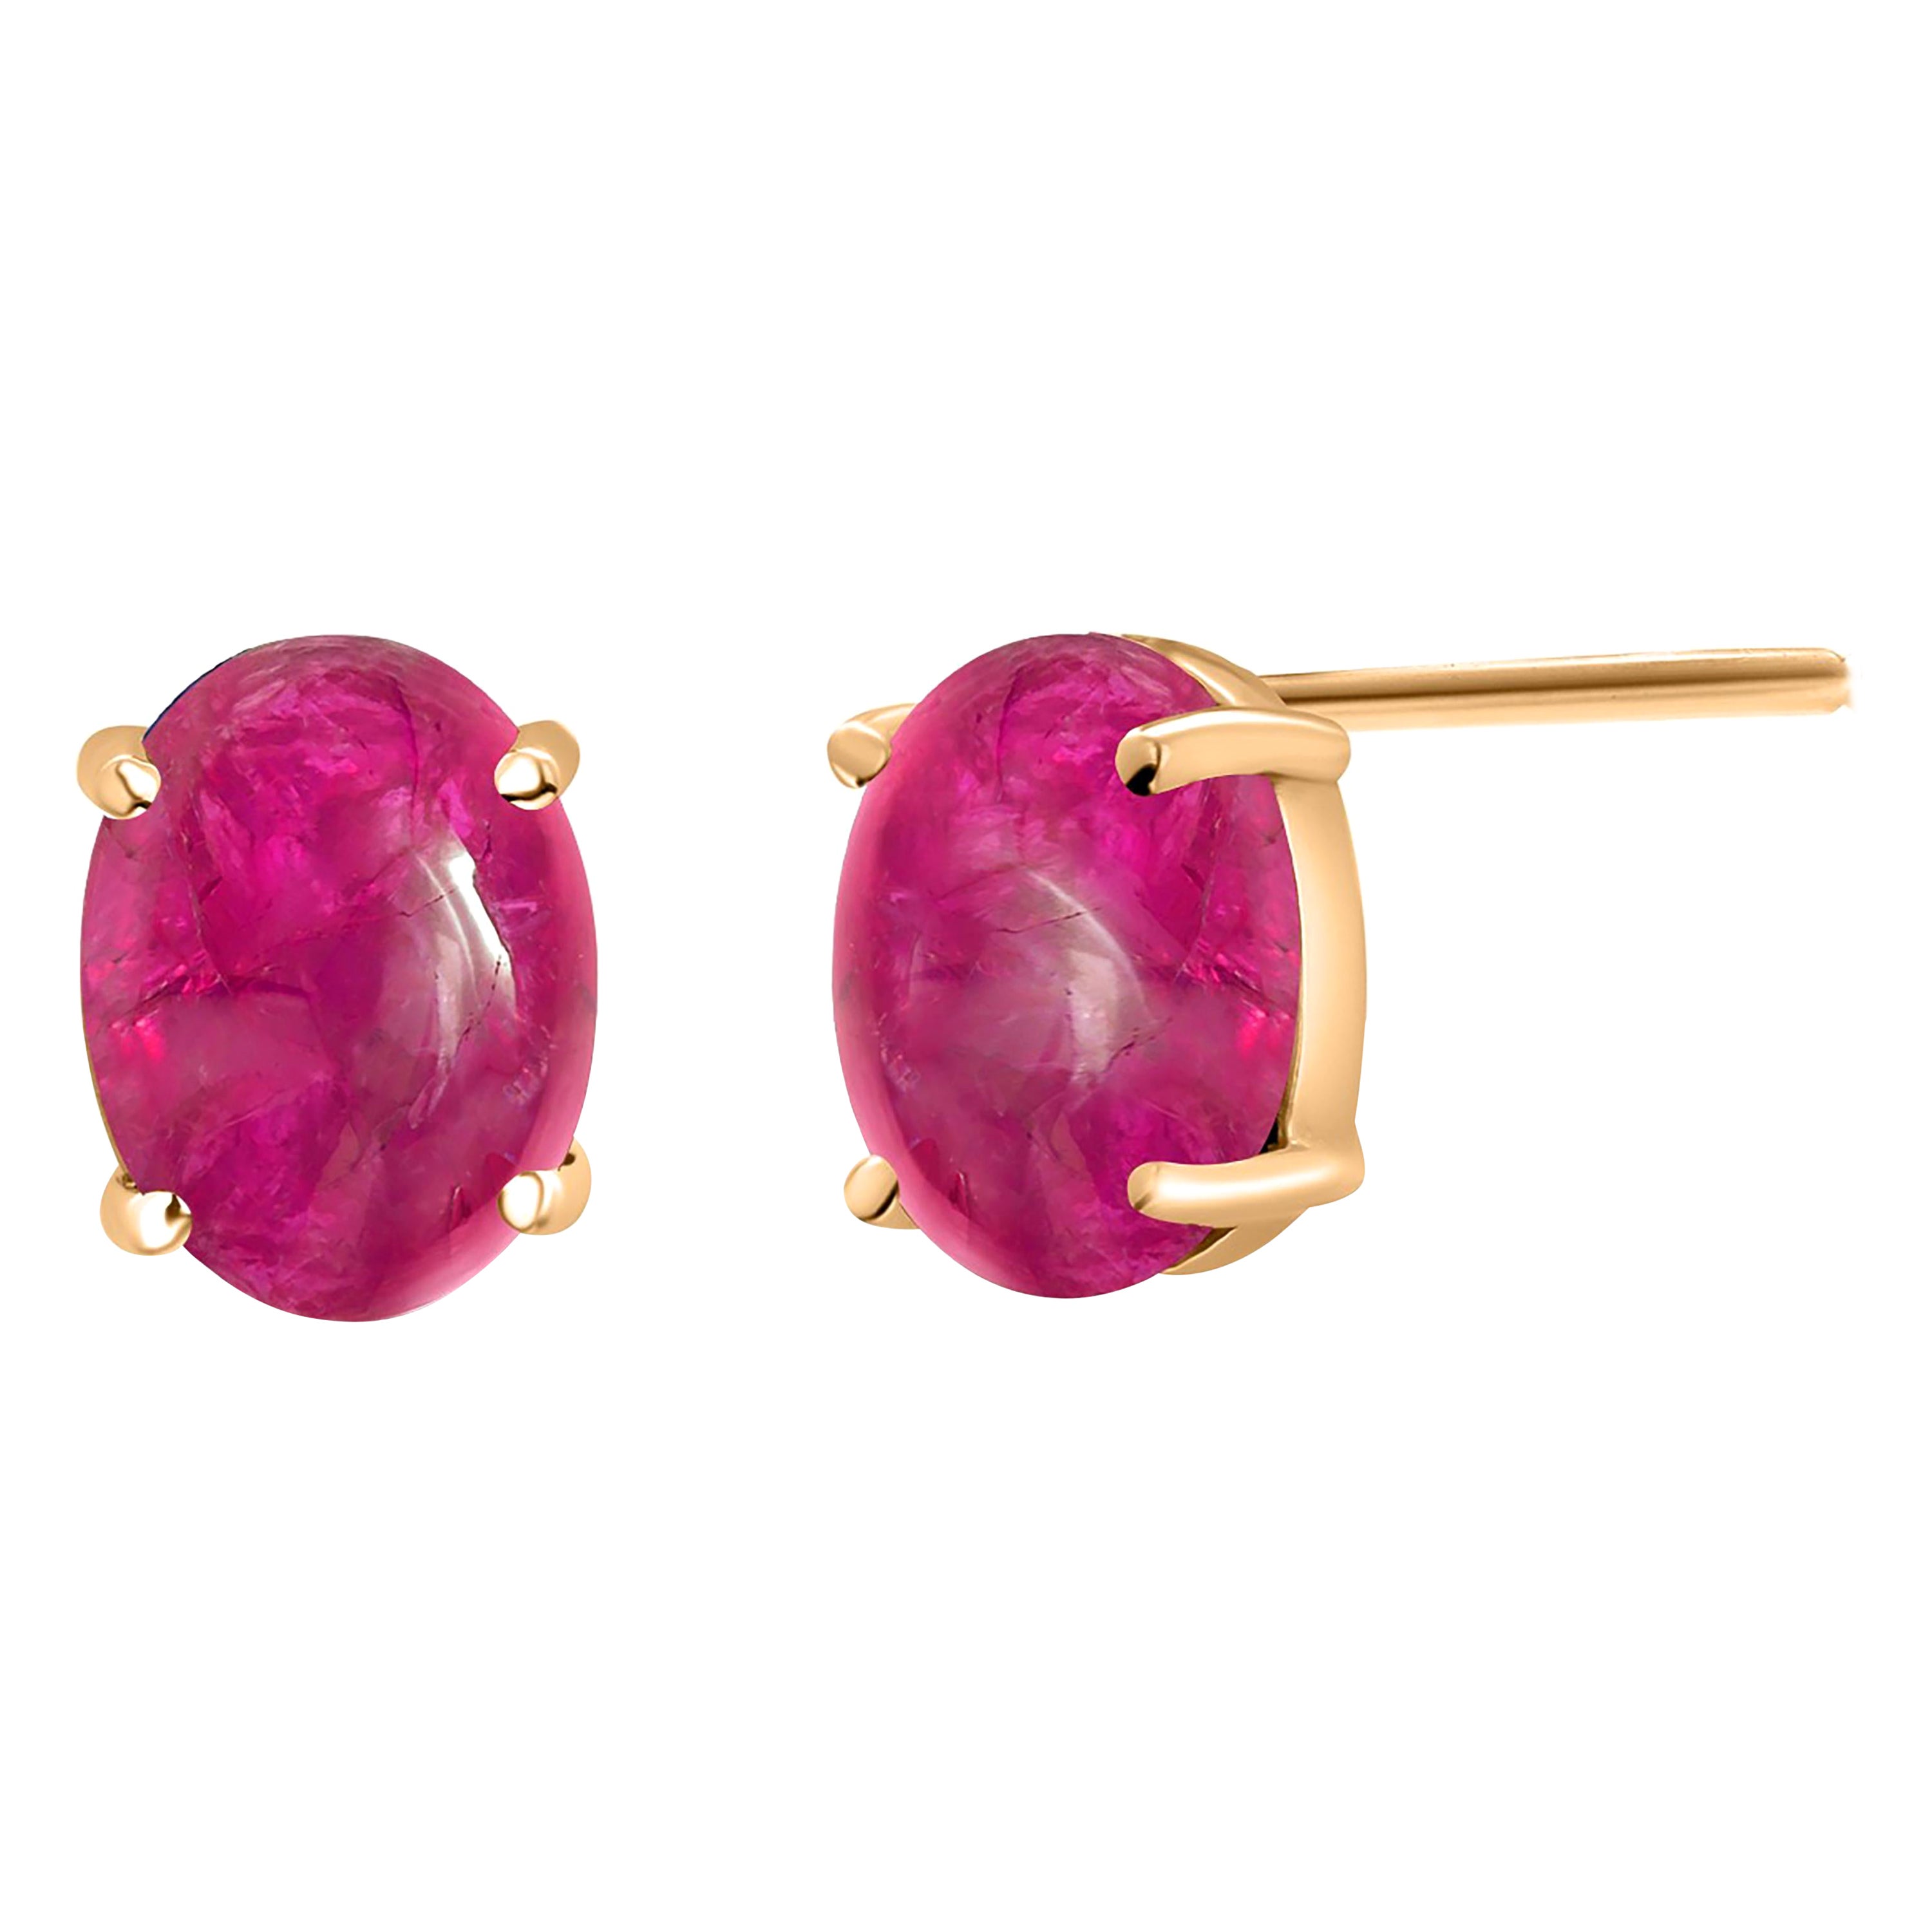 Matched Oval Cabochon Ruby 2.08 Carat Yellow Gold 0.27 x 0.20 Inch Stud Earrings